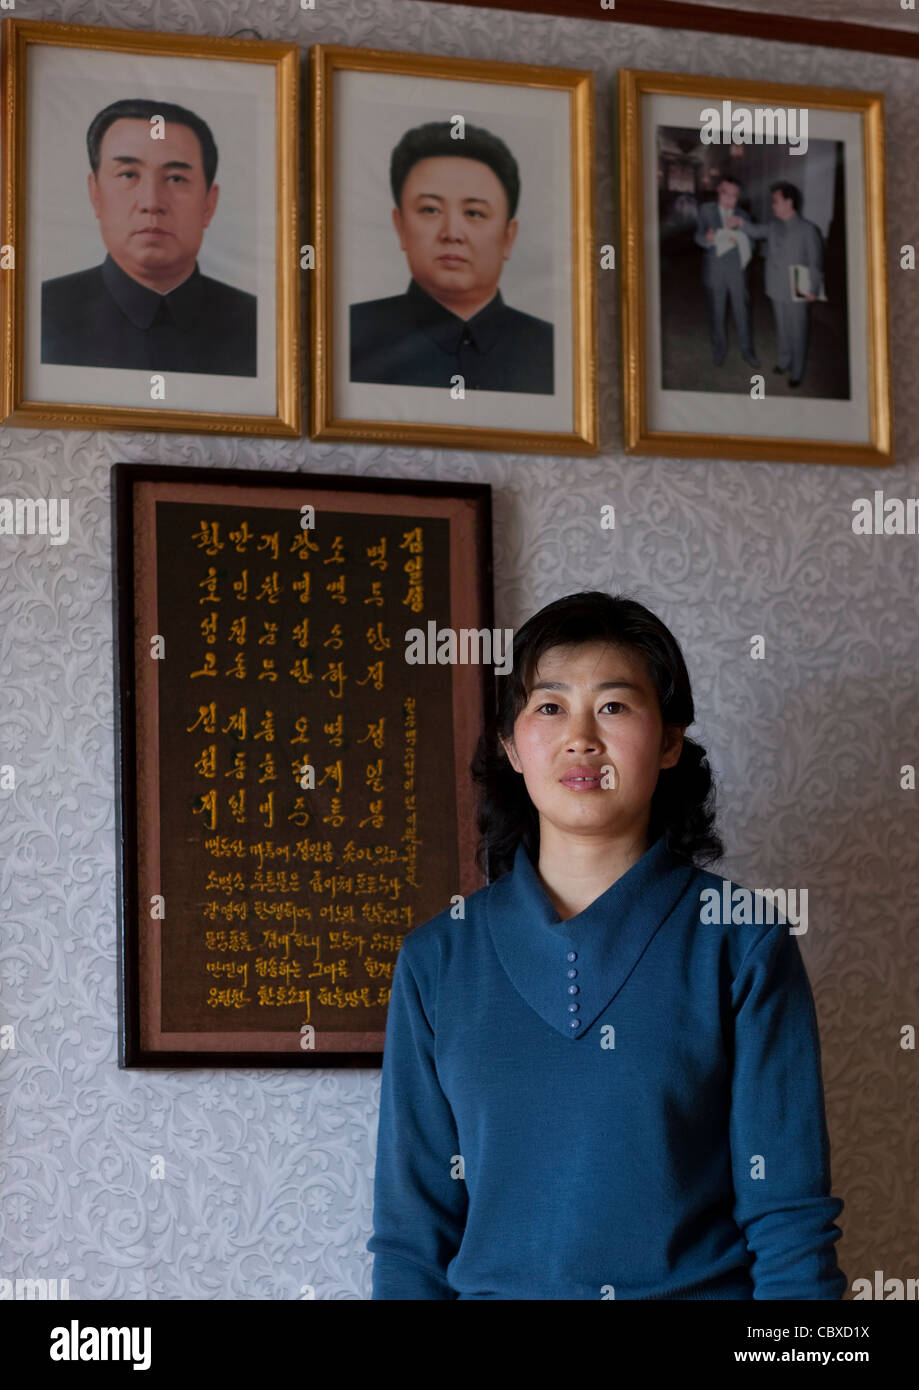 WOMAN WHO GOT A VISIT OF KIM JONG IL IN HER HOUSE, JUNG PYONG RI VILLAGE, NORTH KOREA Stock Photo